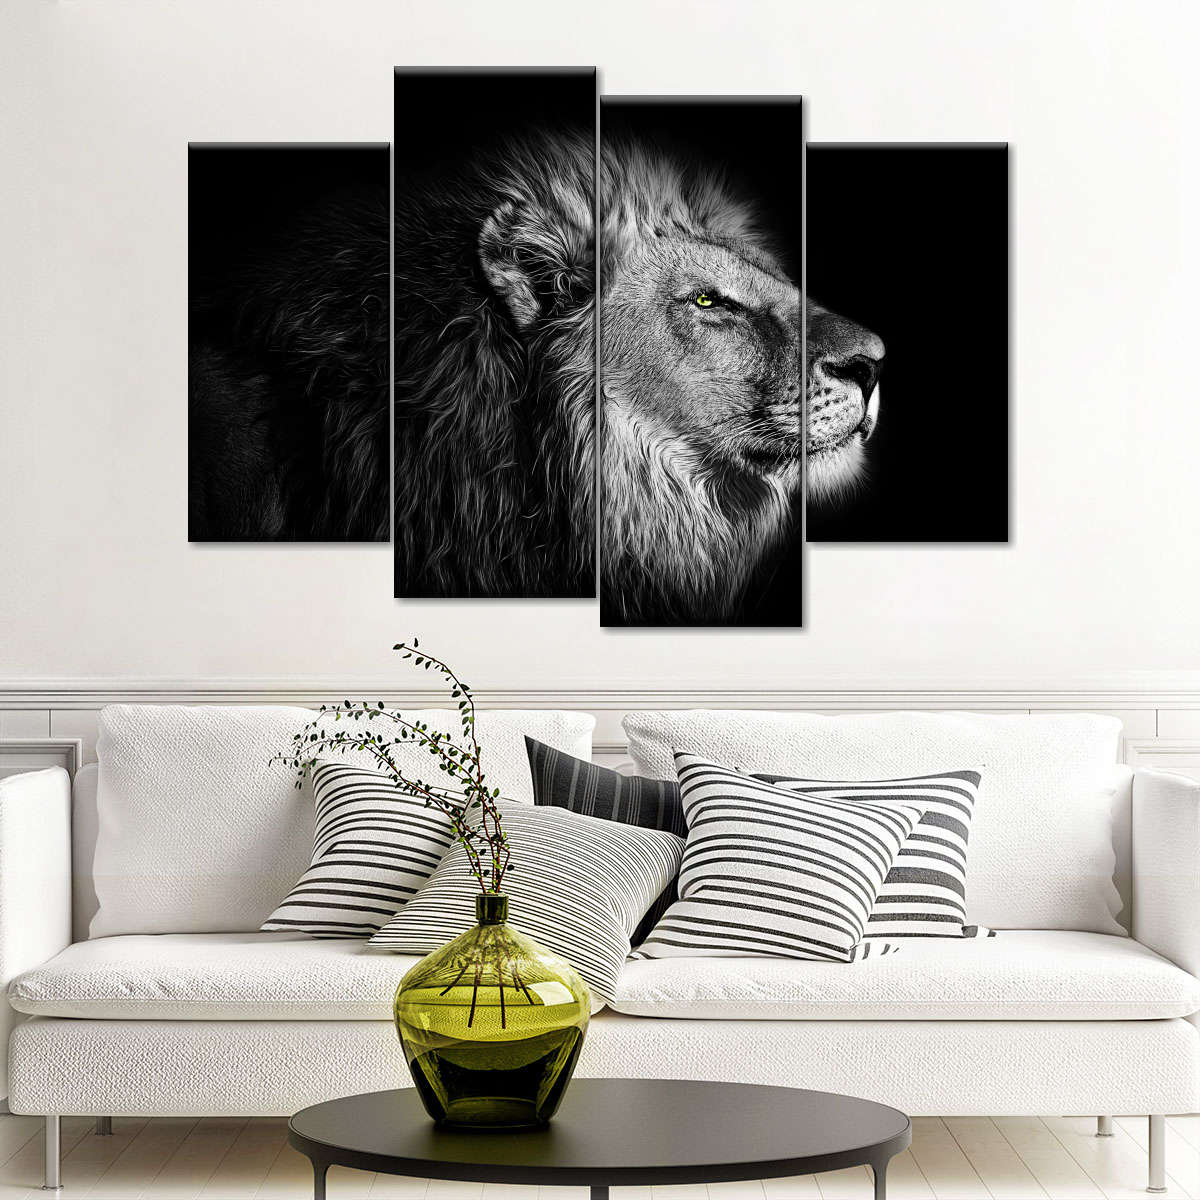 Mysterious Lion Head Wall Art | Photography